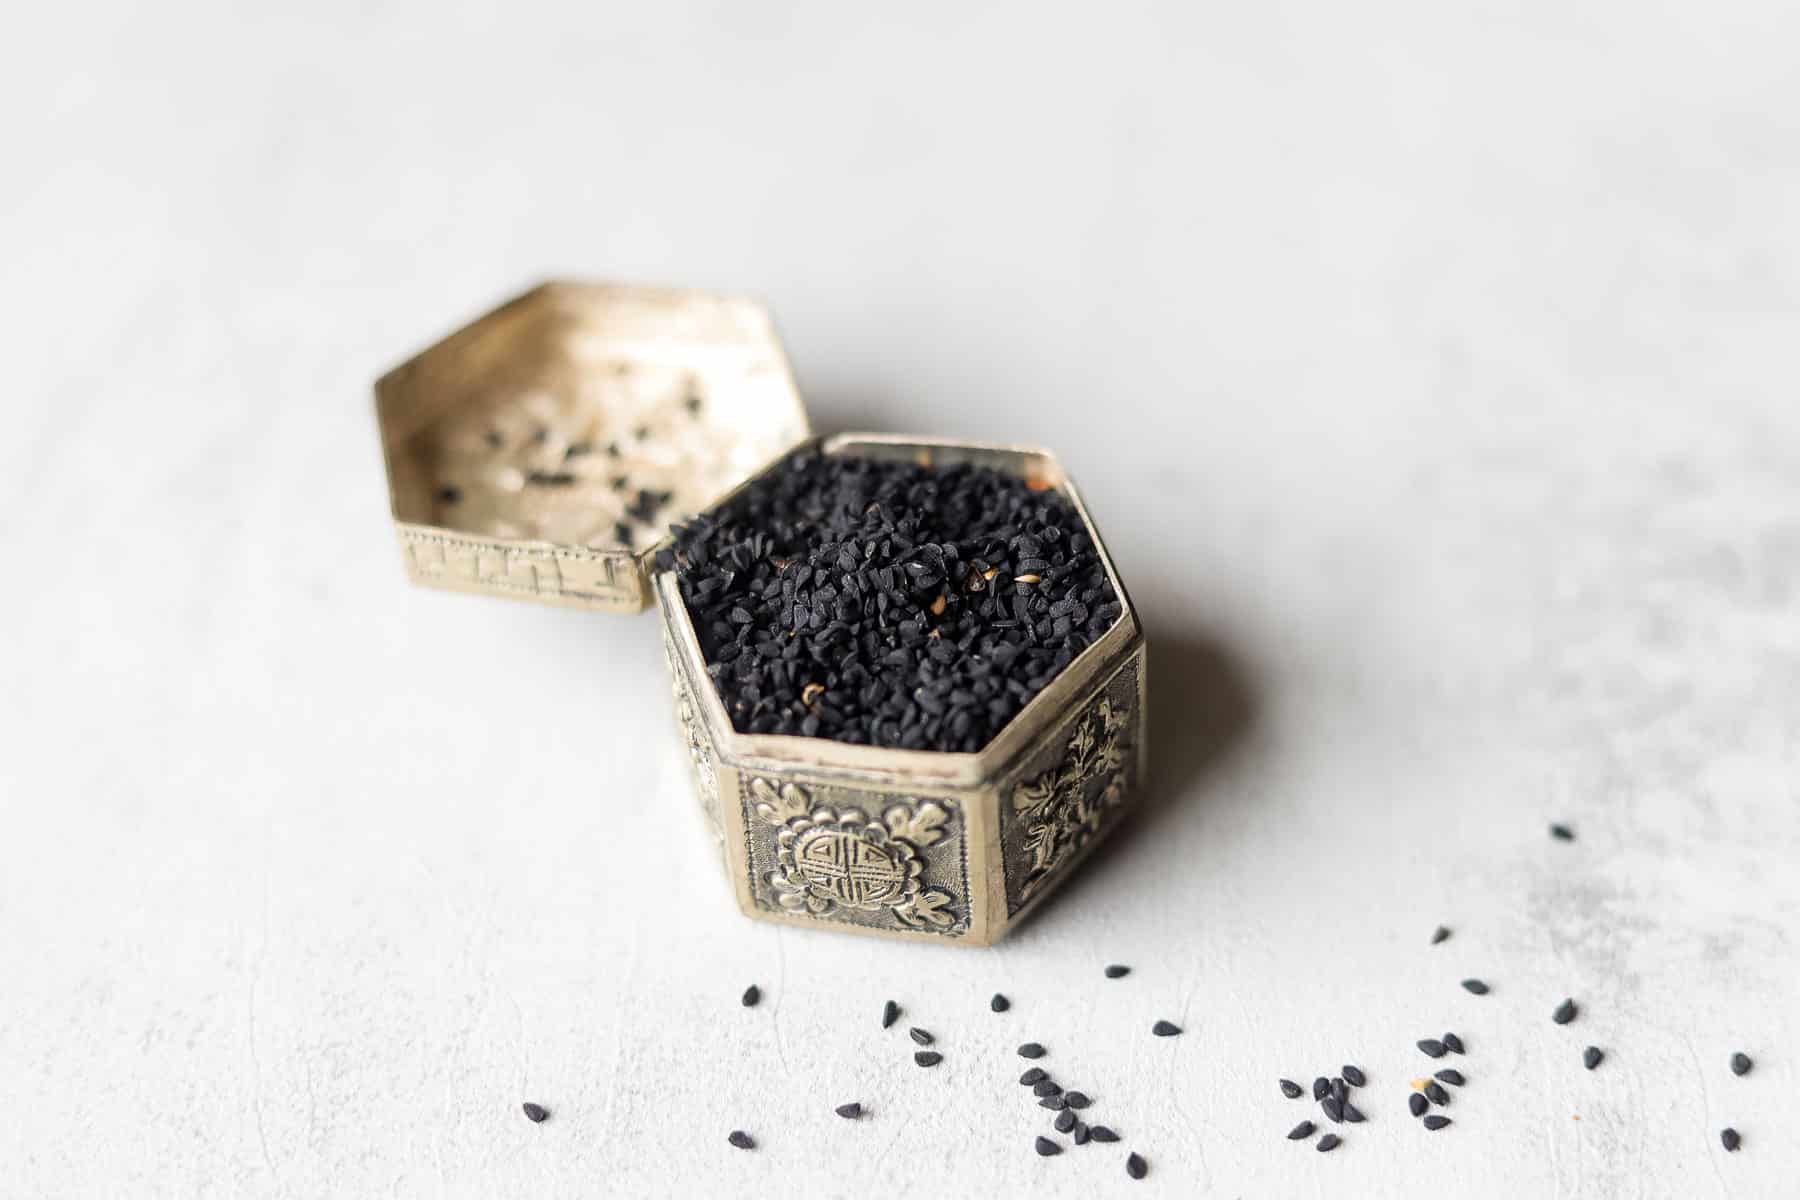 silver snuff box filled with nigella seeds